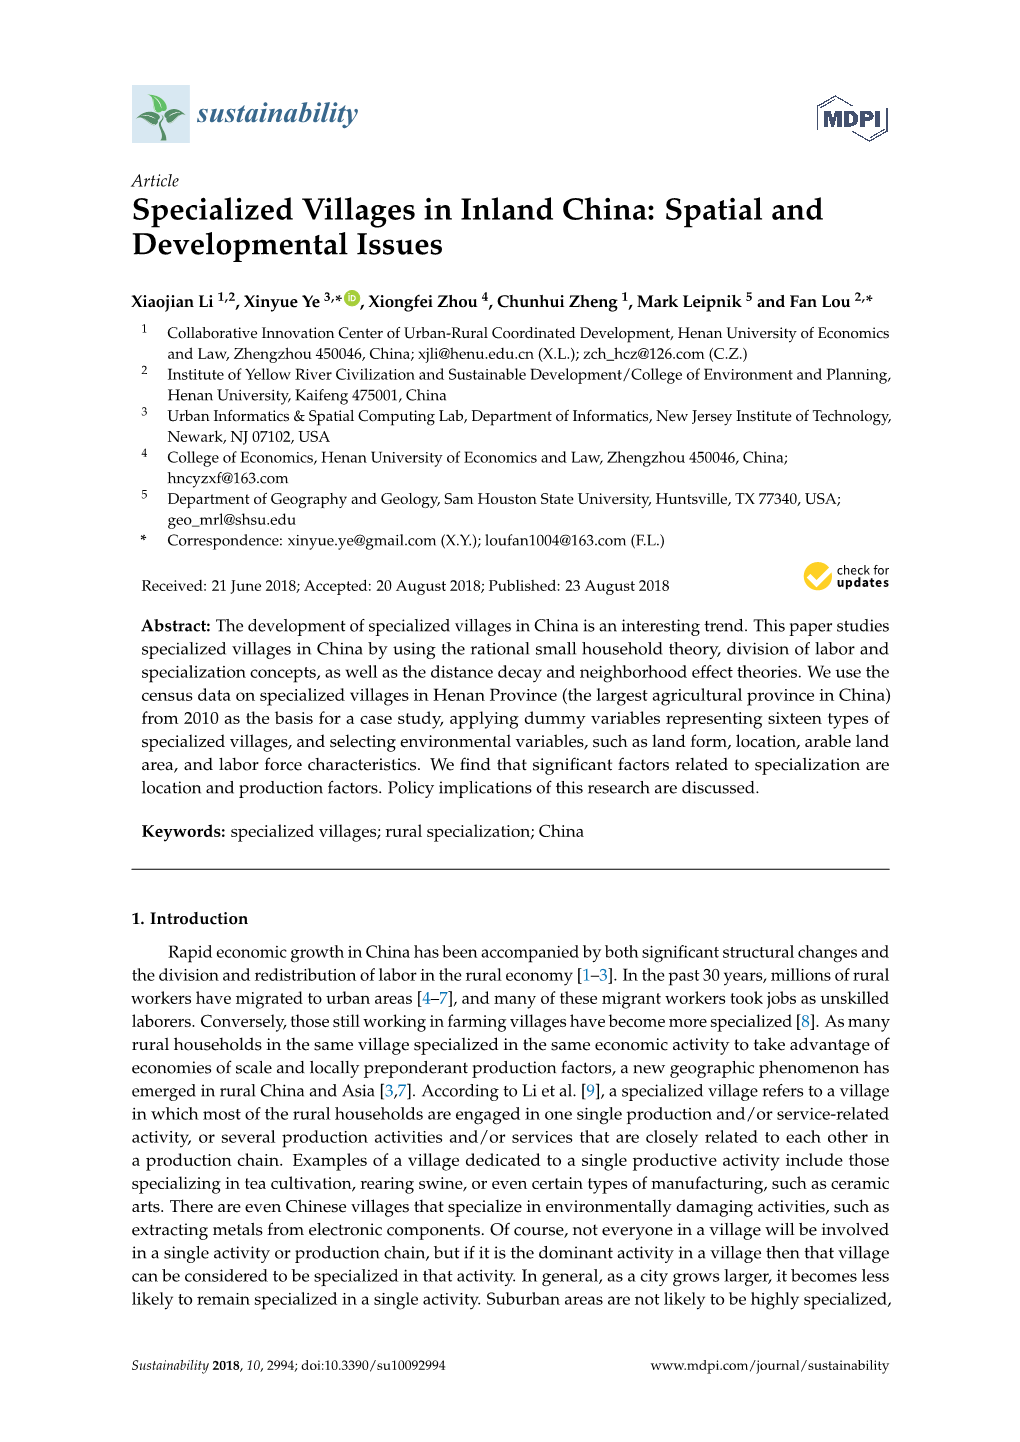 Specialized Villages in Inland China: Spatial and Developmental Issues